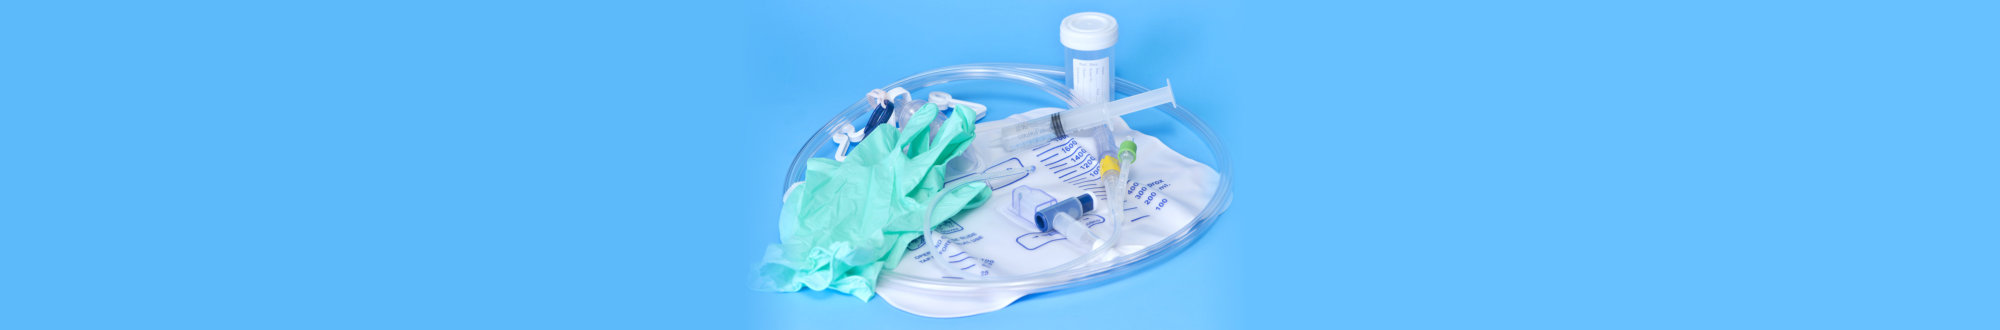 foley catheter and drainage bag with sterile gloves and specimen container